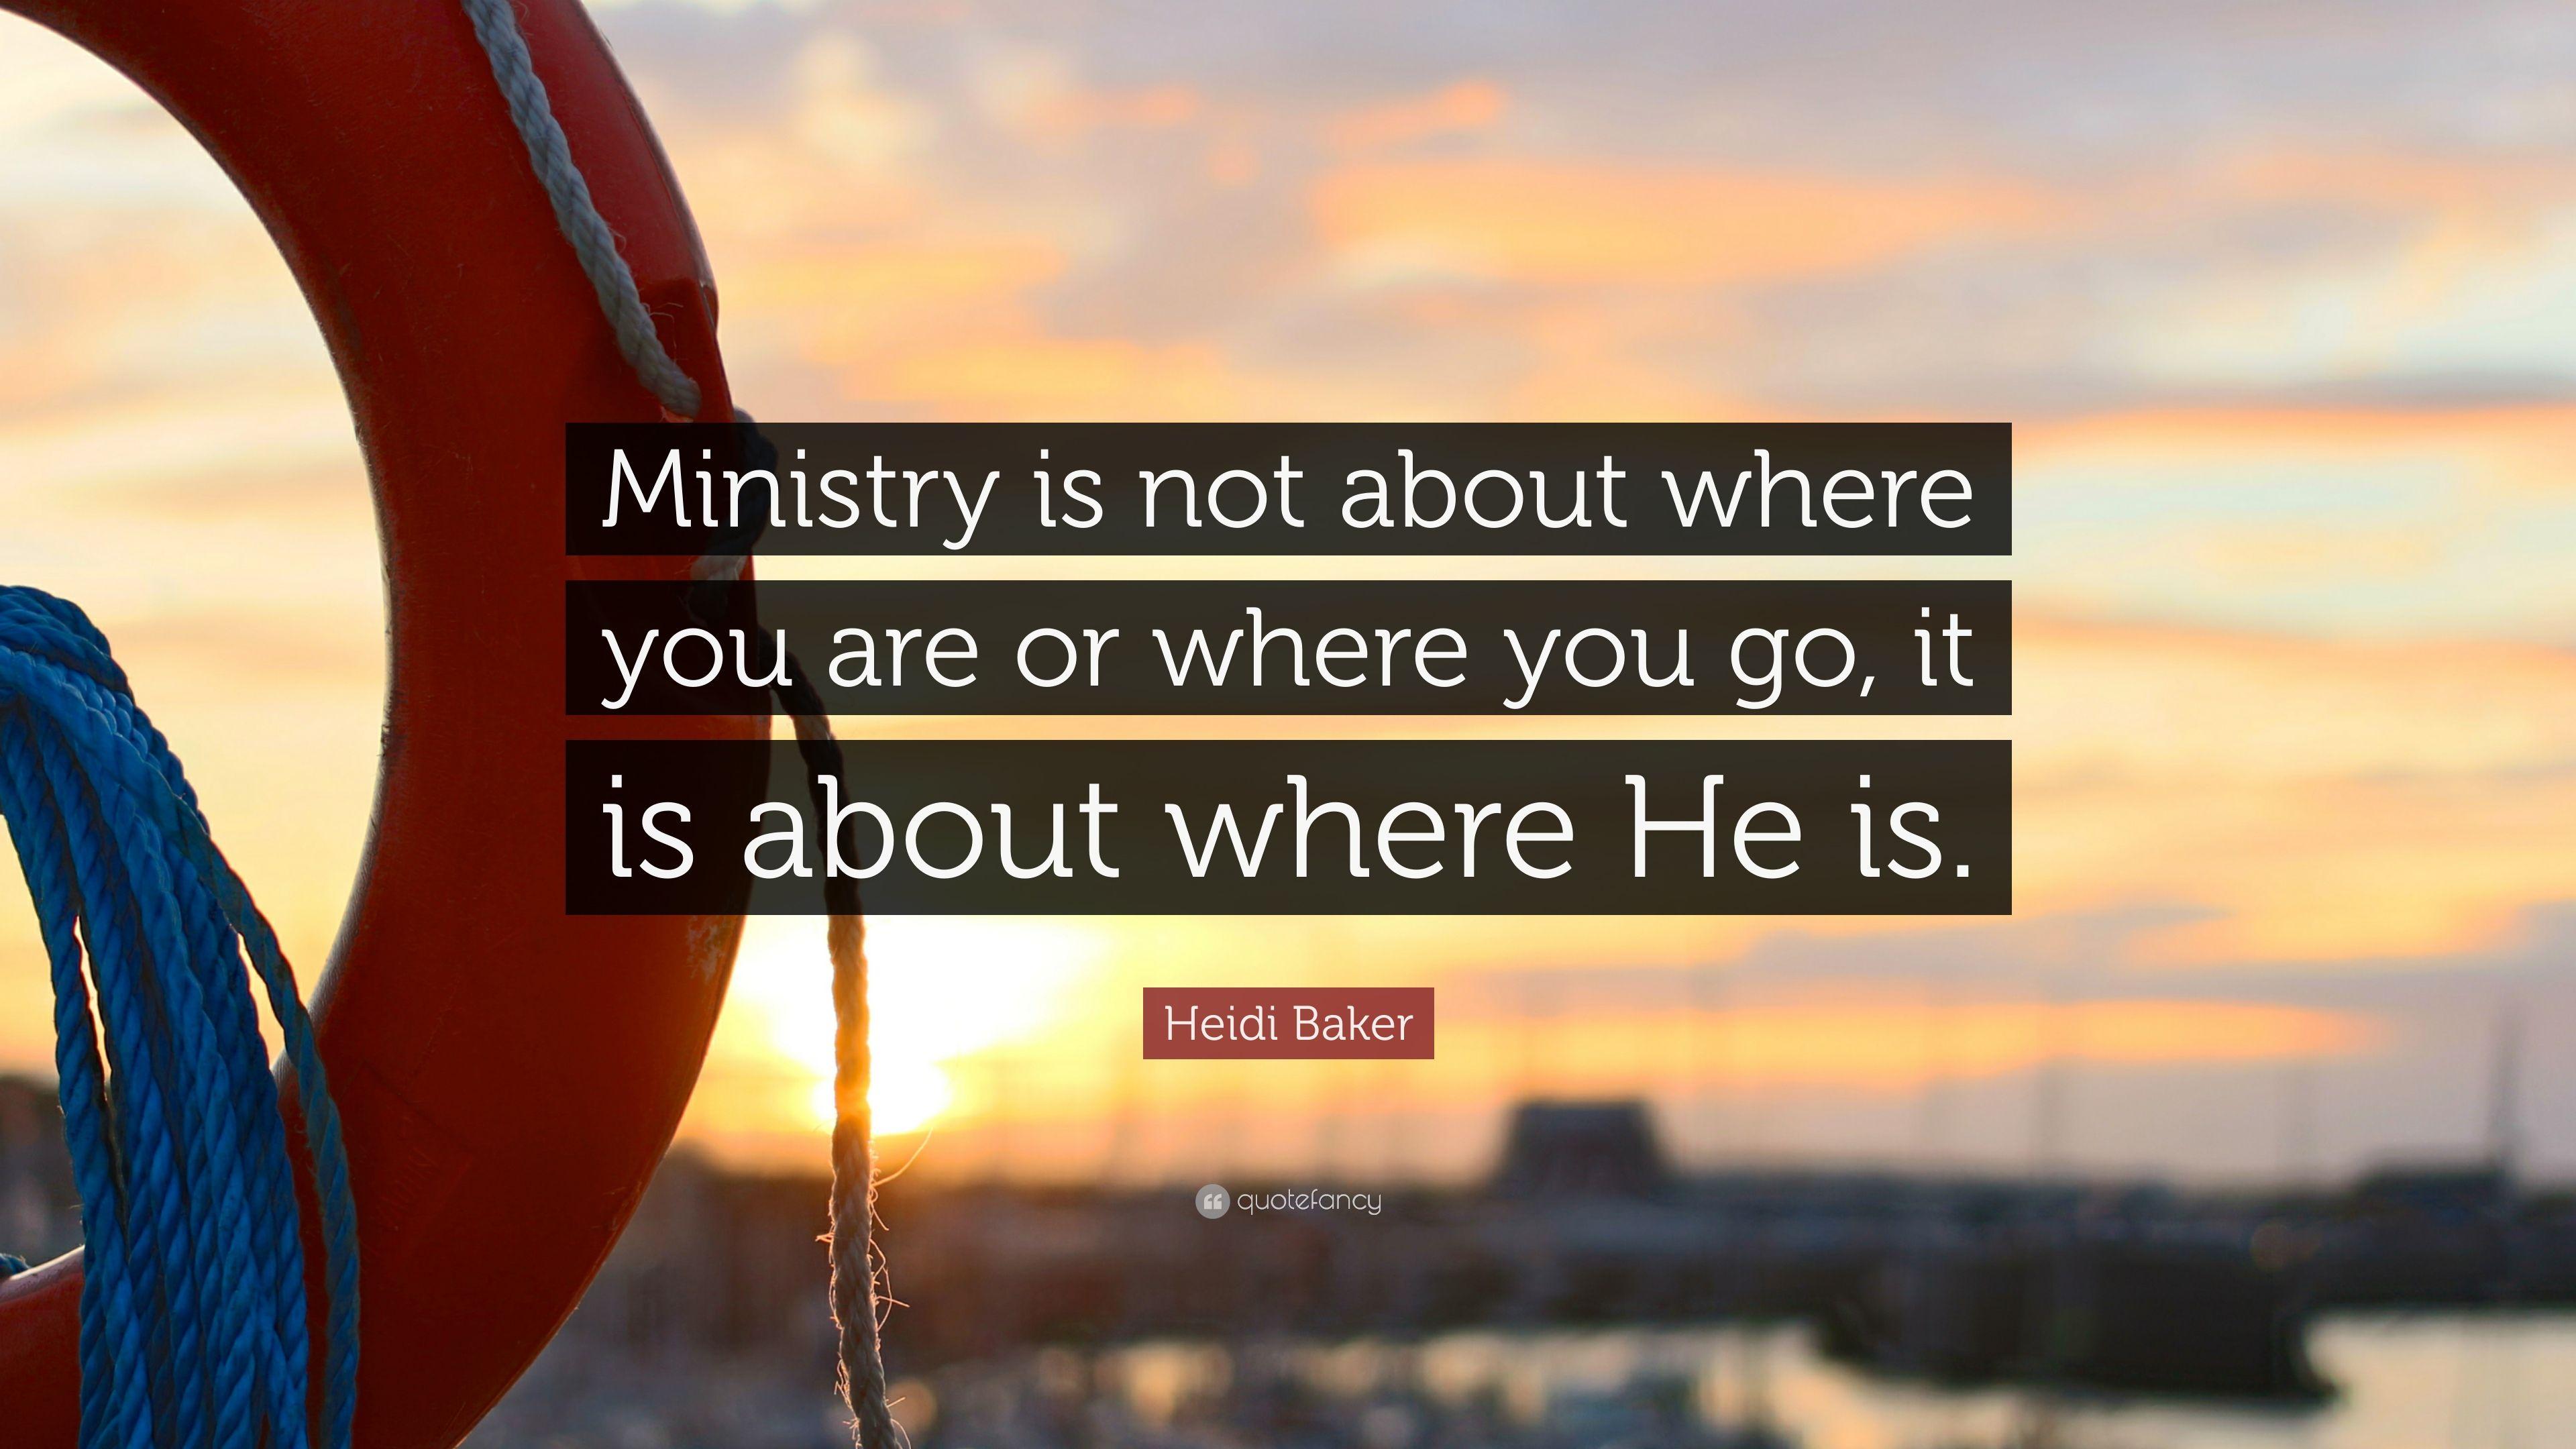 Heidi Baker Quote: "Ministry is not about where you are or where you 